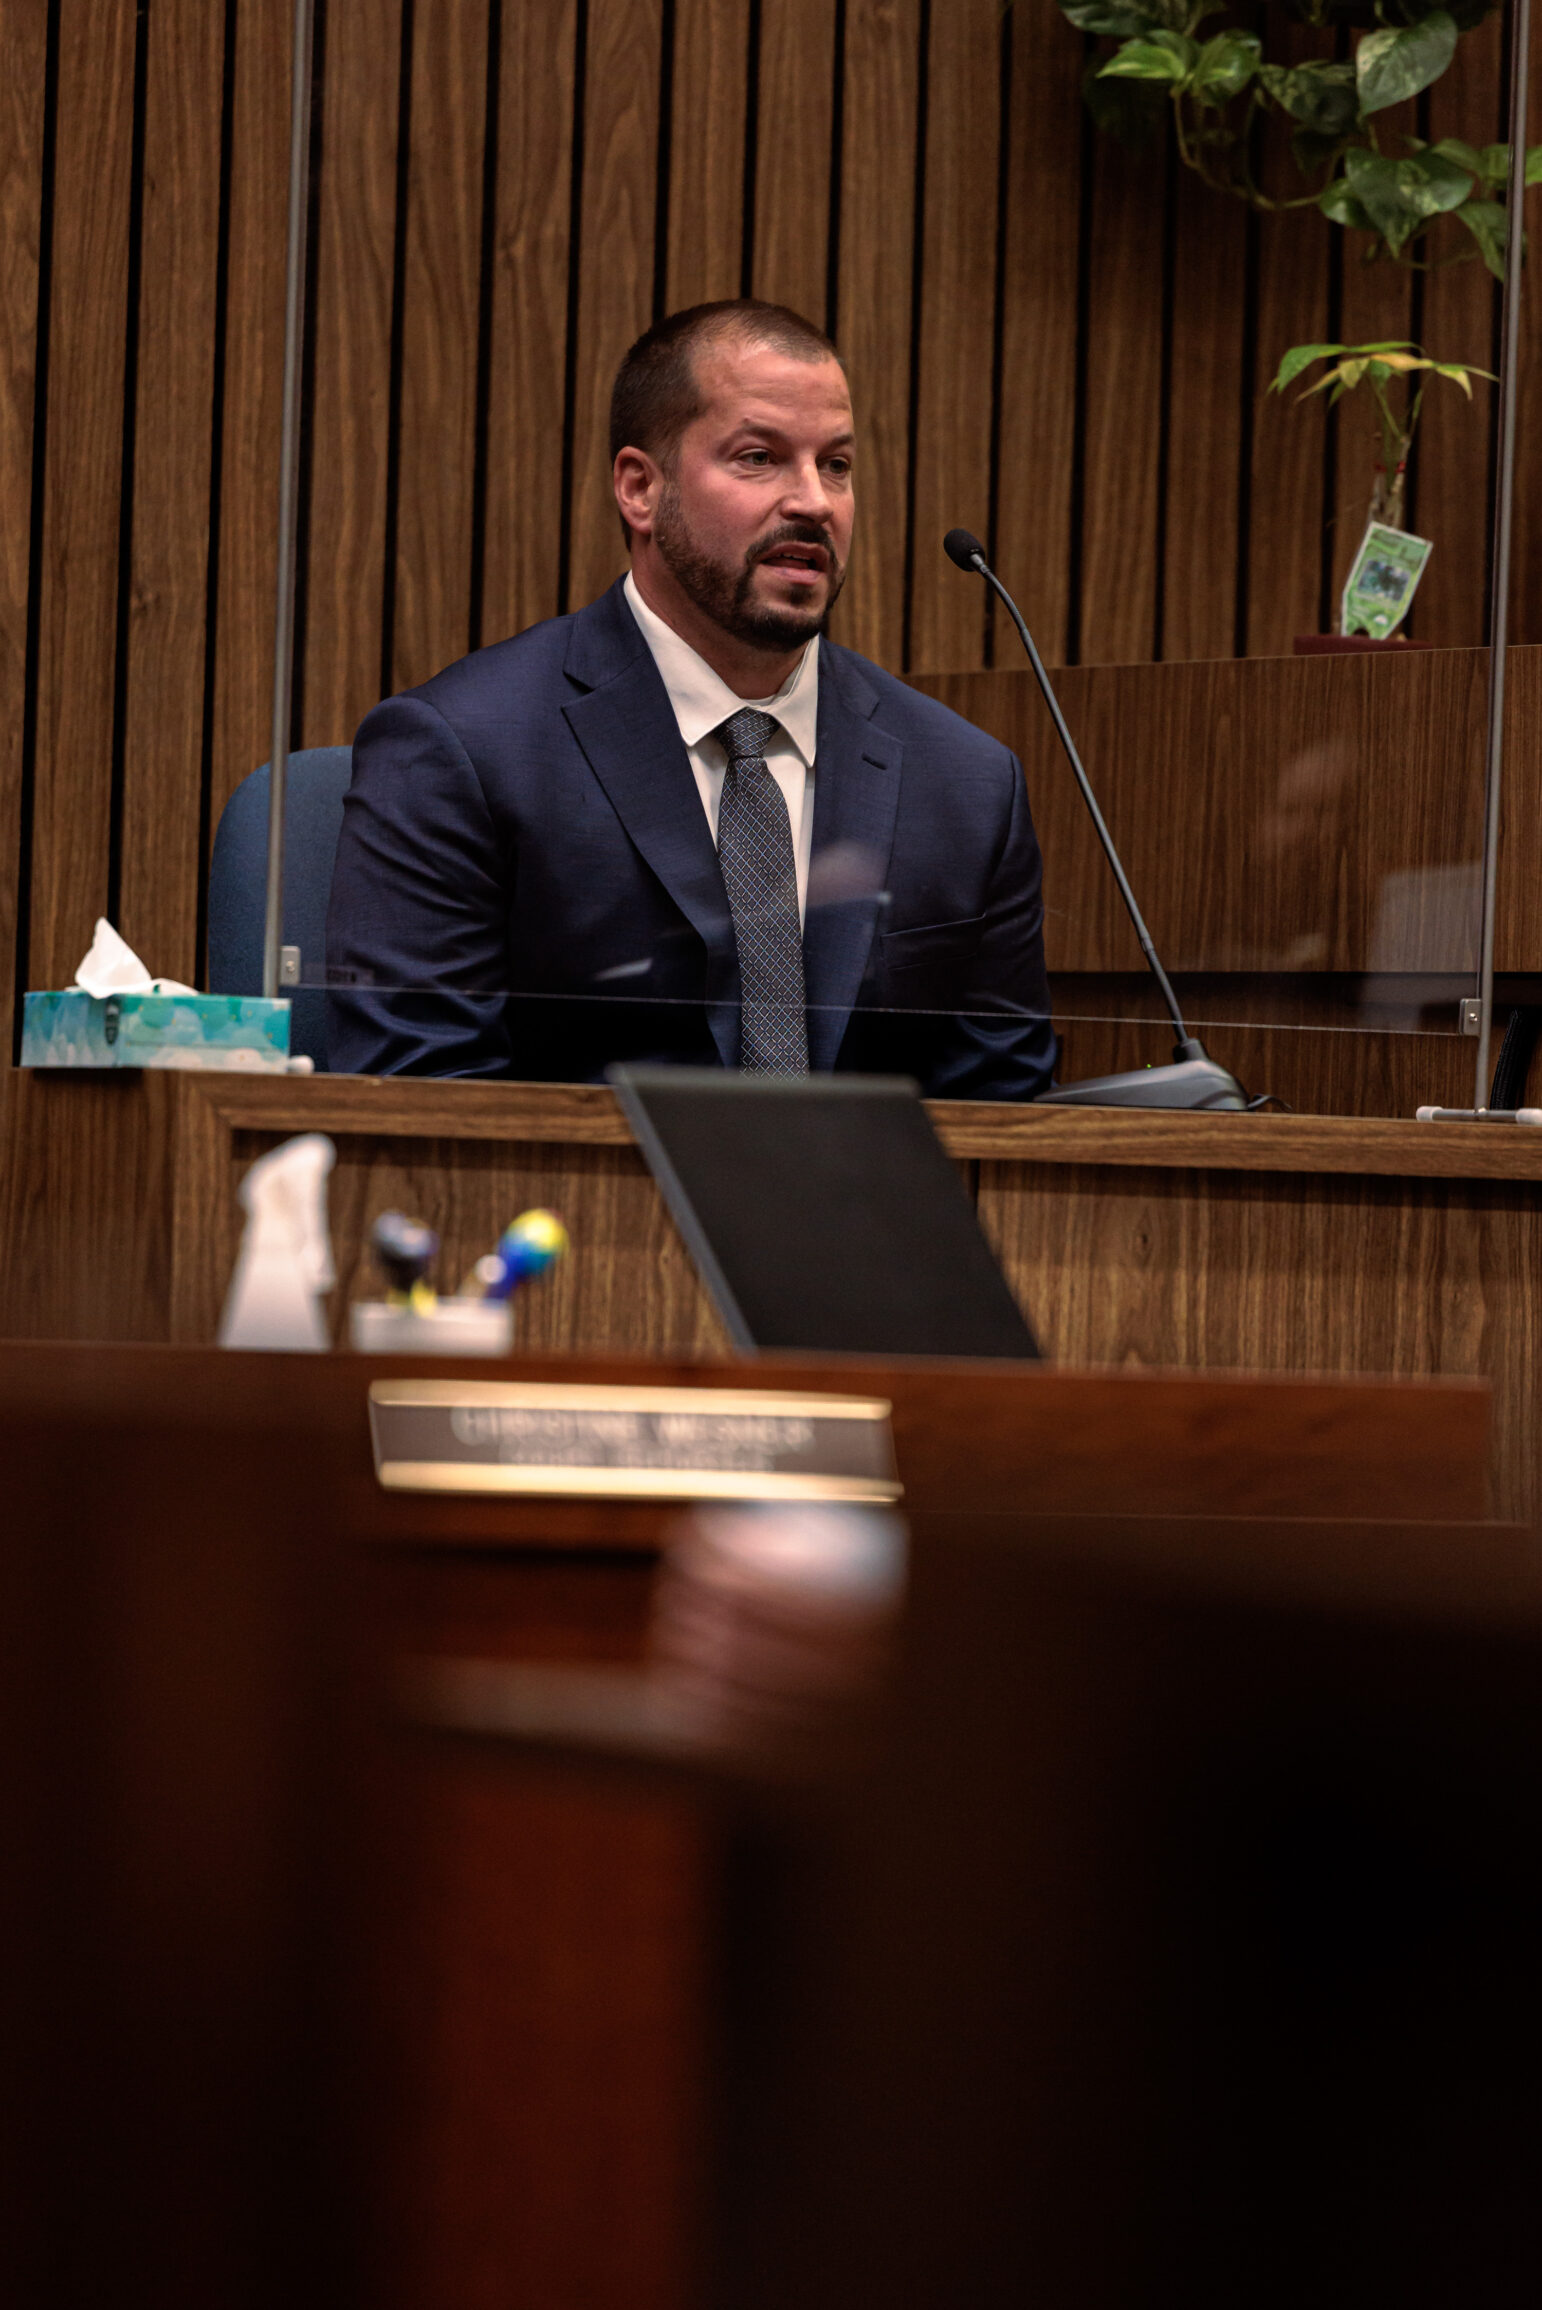 A photo of a man in a business suit sitting in a witness box while giving testimony. He has short hair, a trimmed beard, and wears a blue suit with a tie.